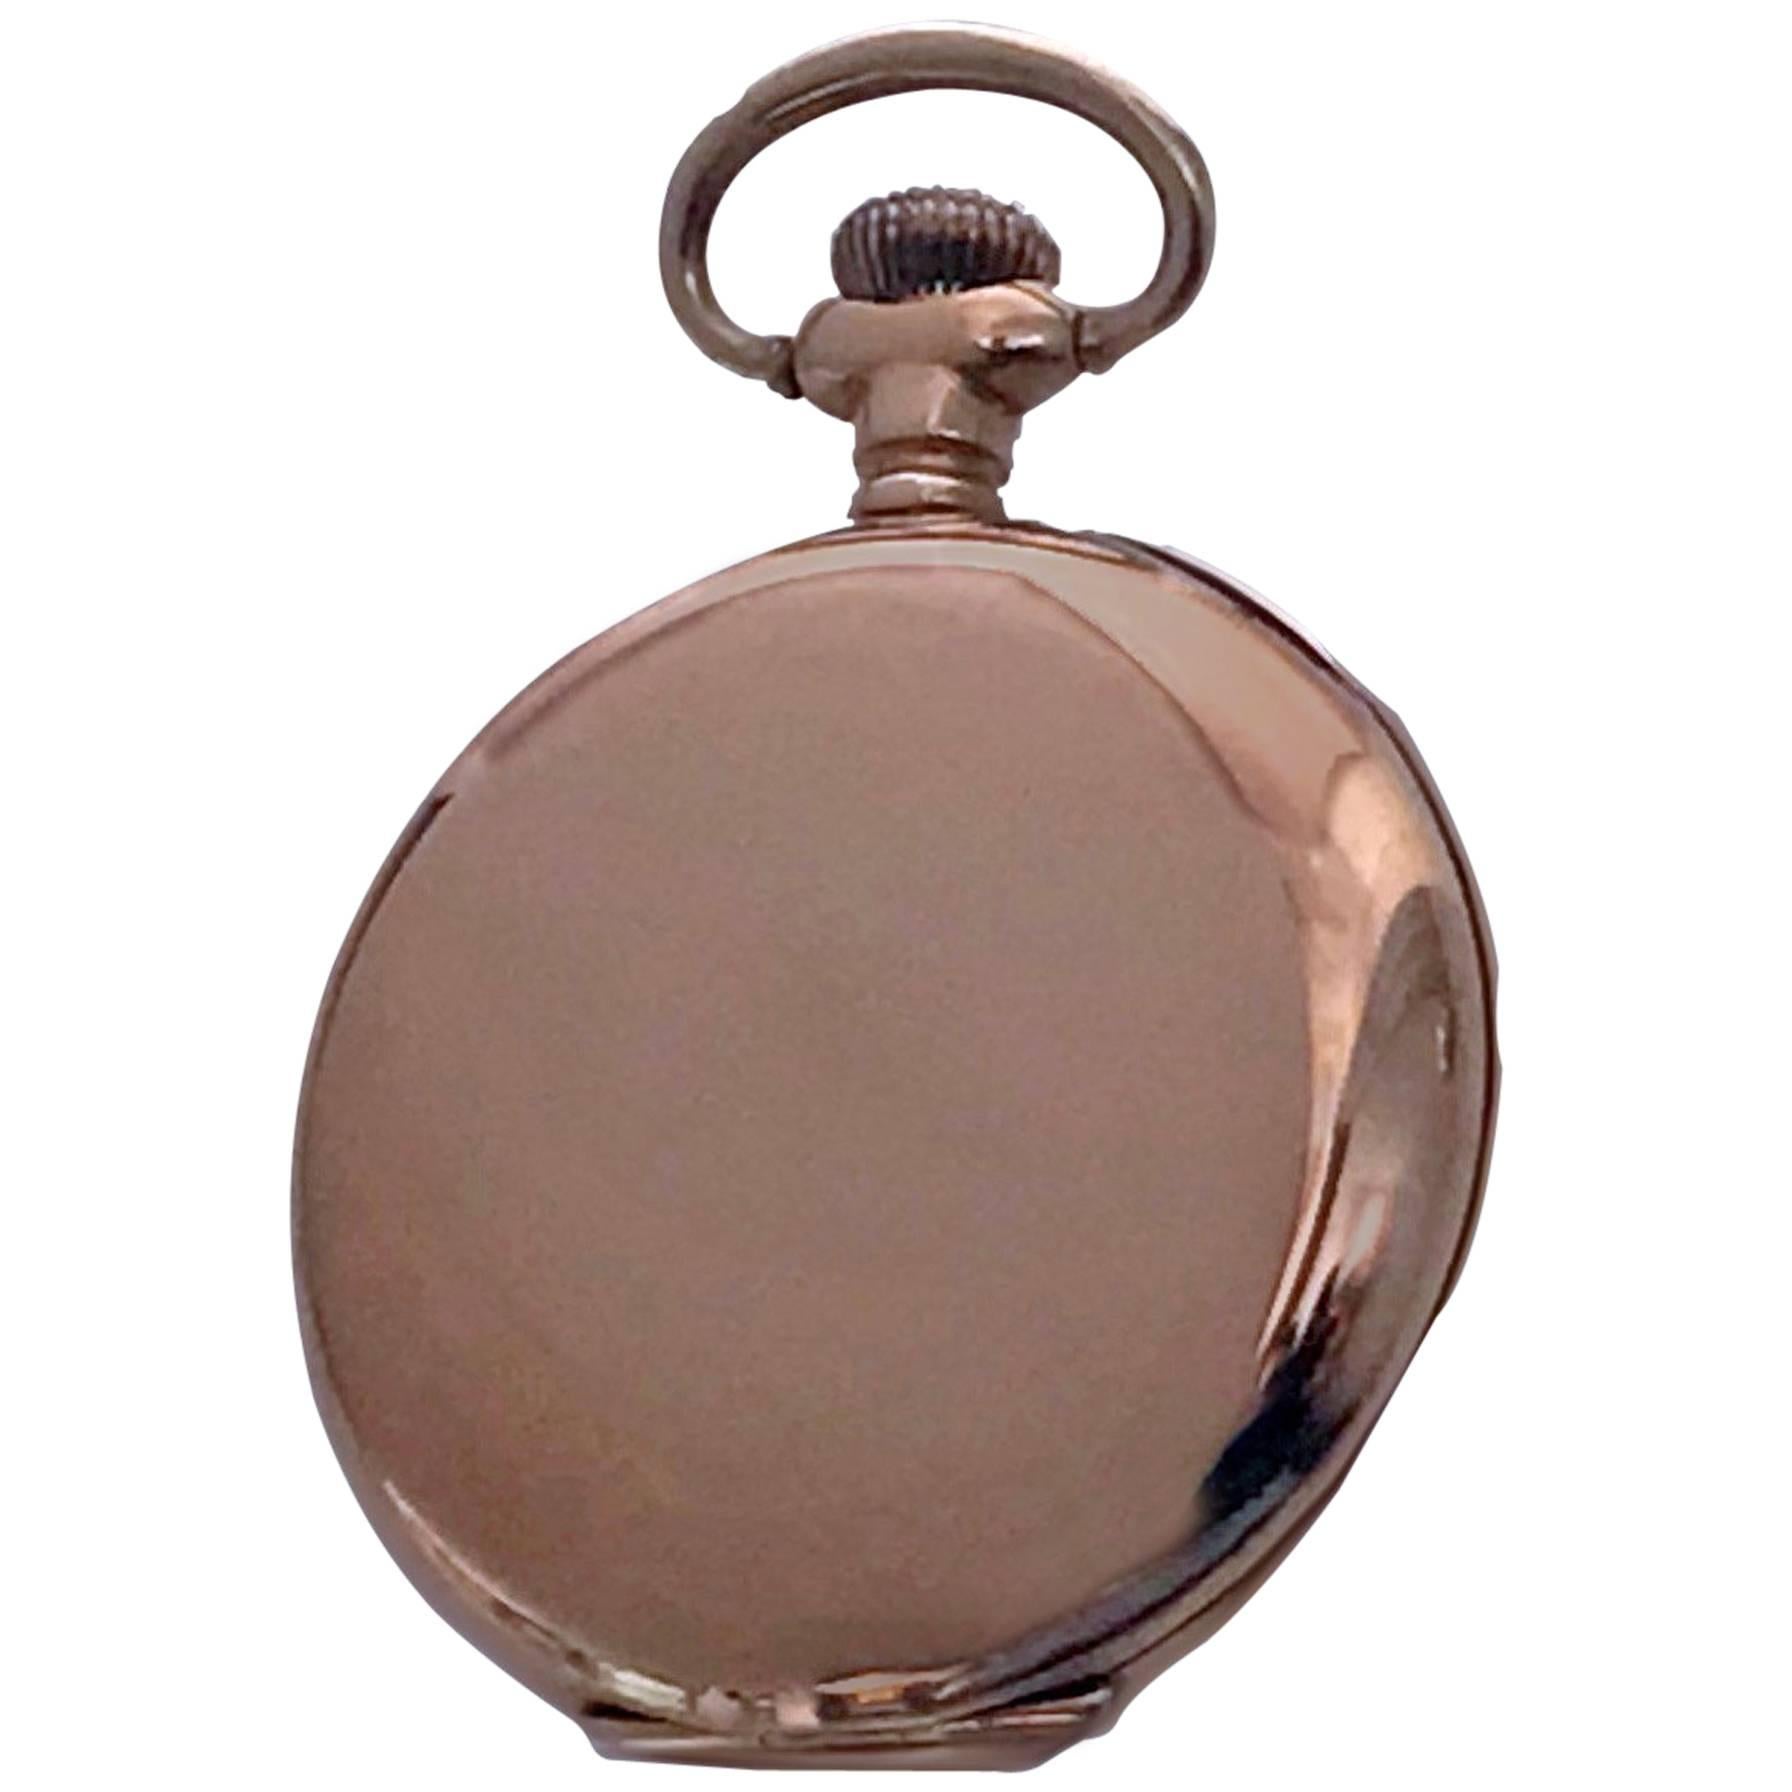 An American Waltham 14k stem wind Gold Hunter Case Pocket Watch, C. 1900. Case width 33mm. White porcelain dial with black Roman numerals, and an outer five-minute increment scale in red enamel, subsidiary dial at 6; American Waltham movement number